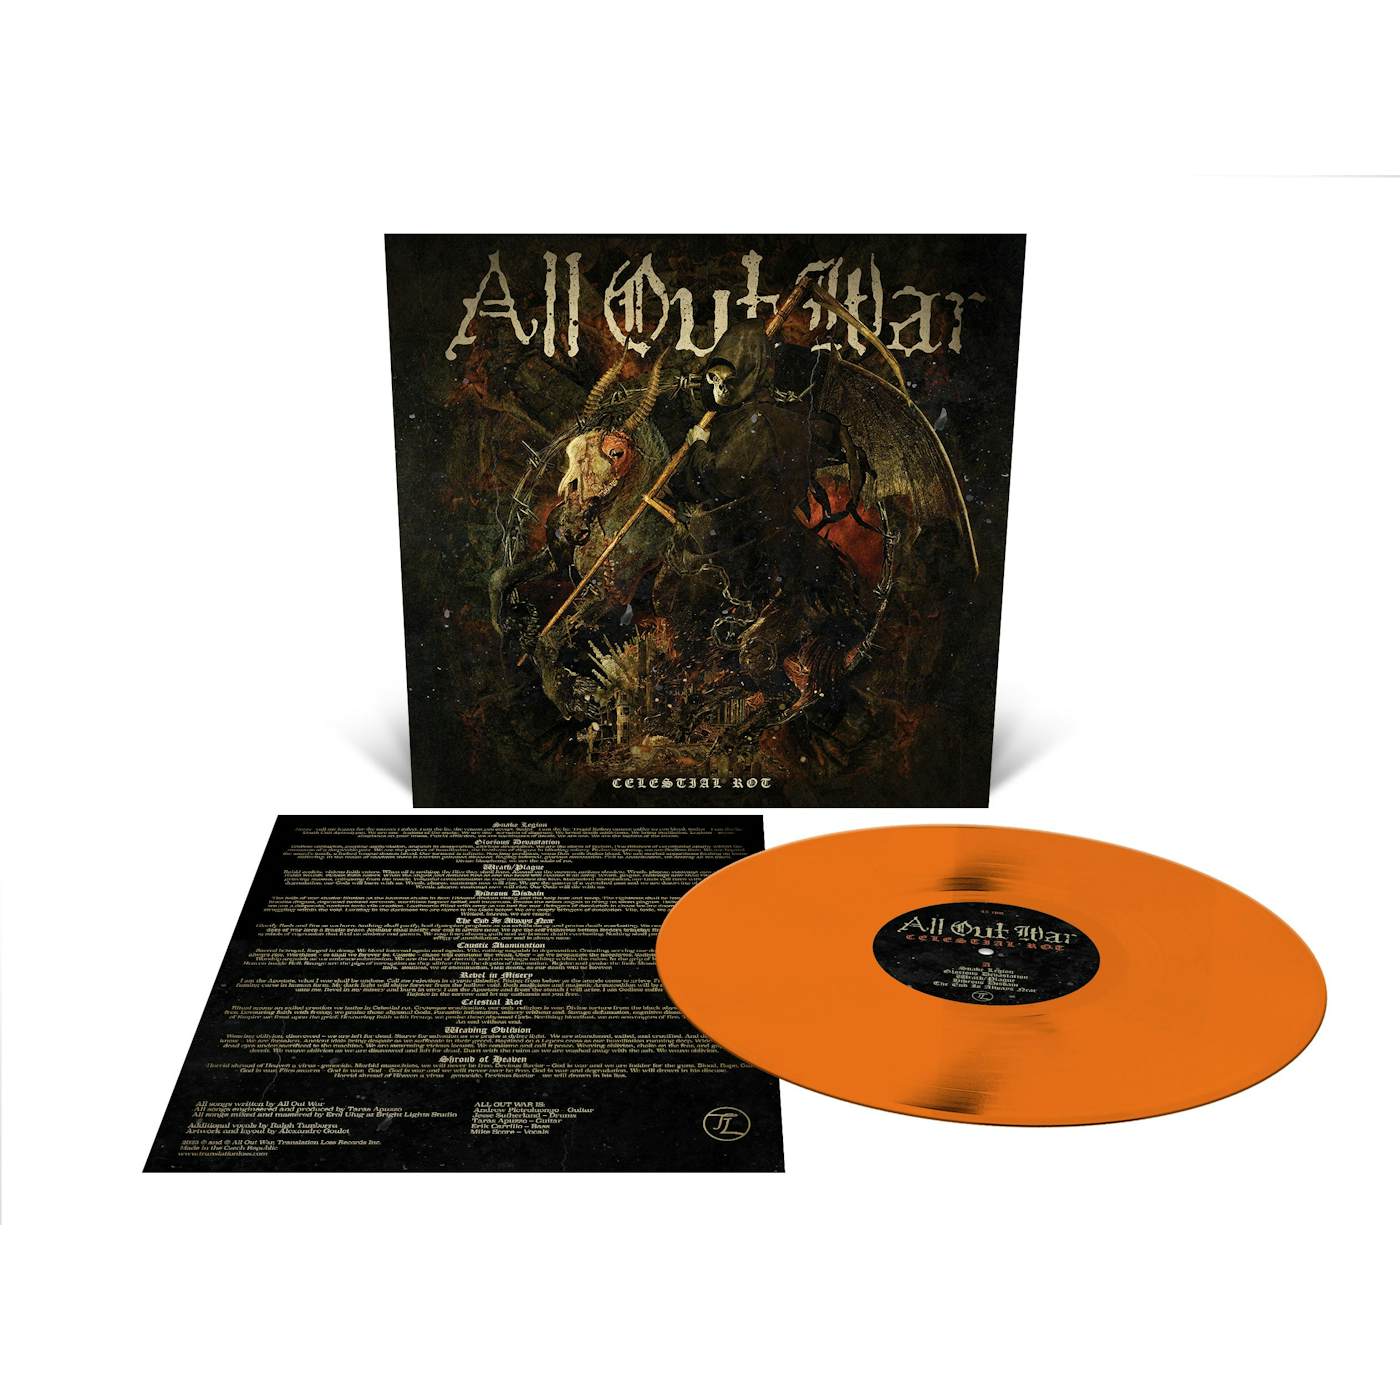 All Out War "Celestial Rot" 12"